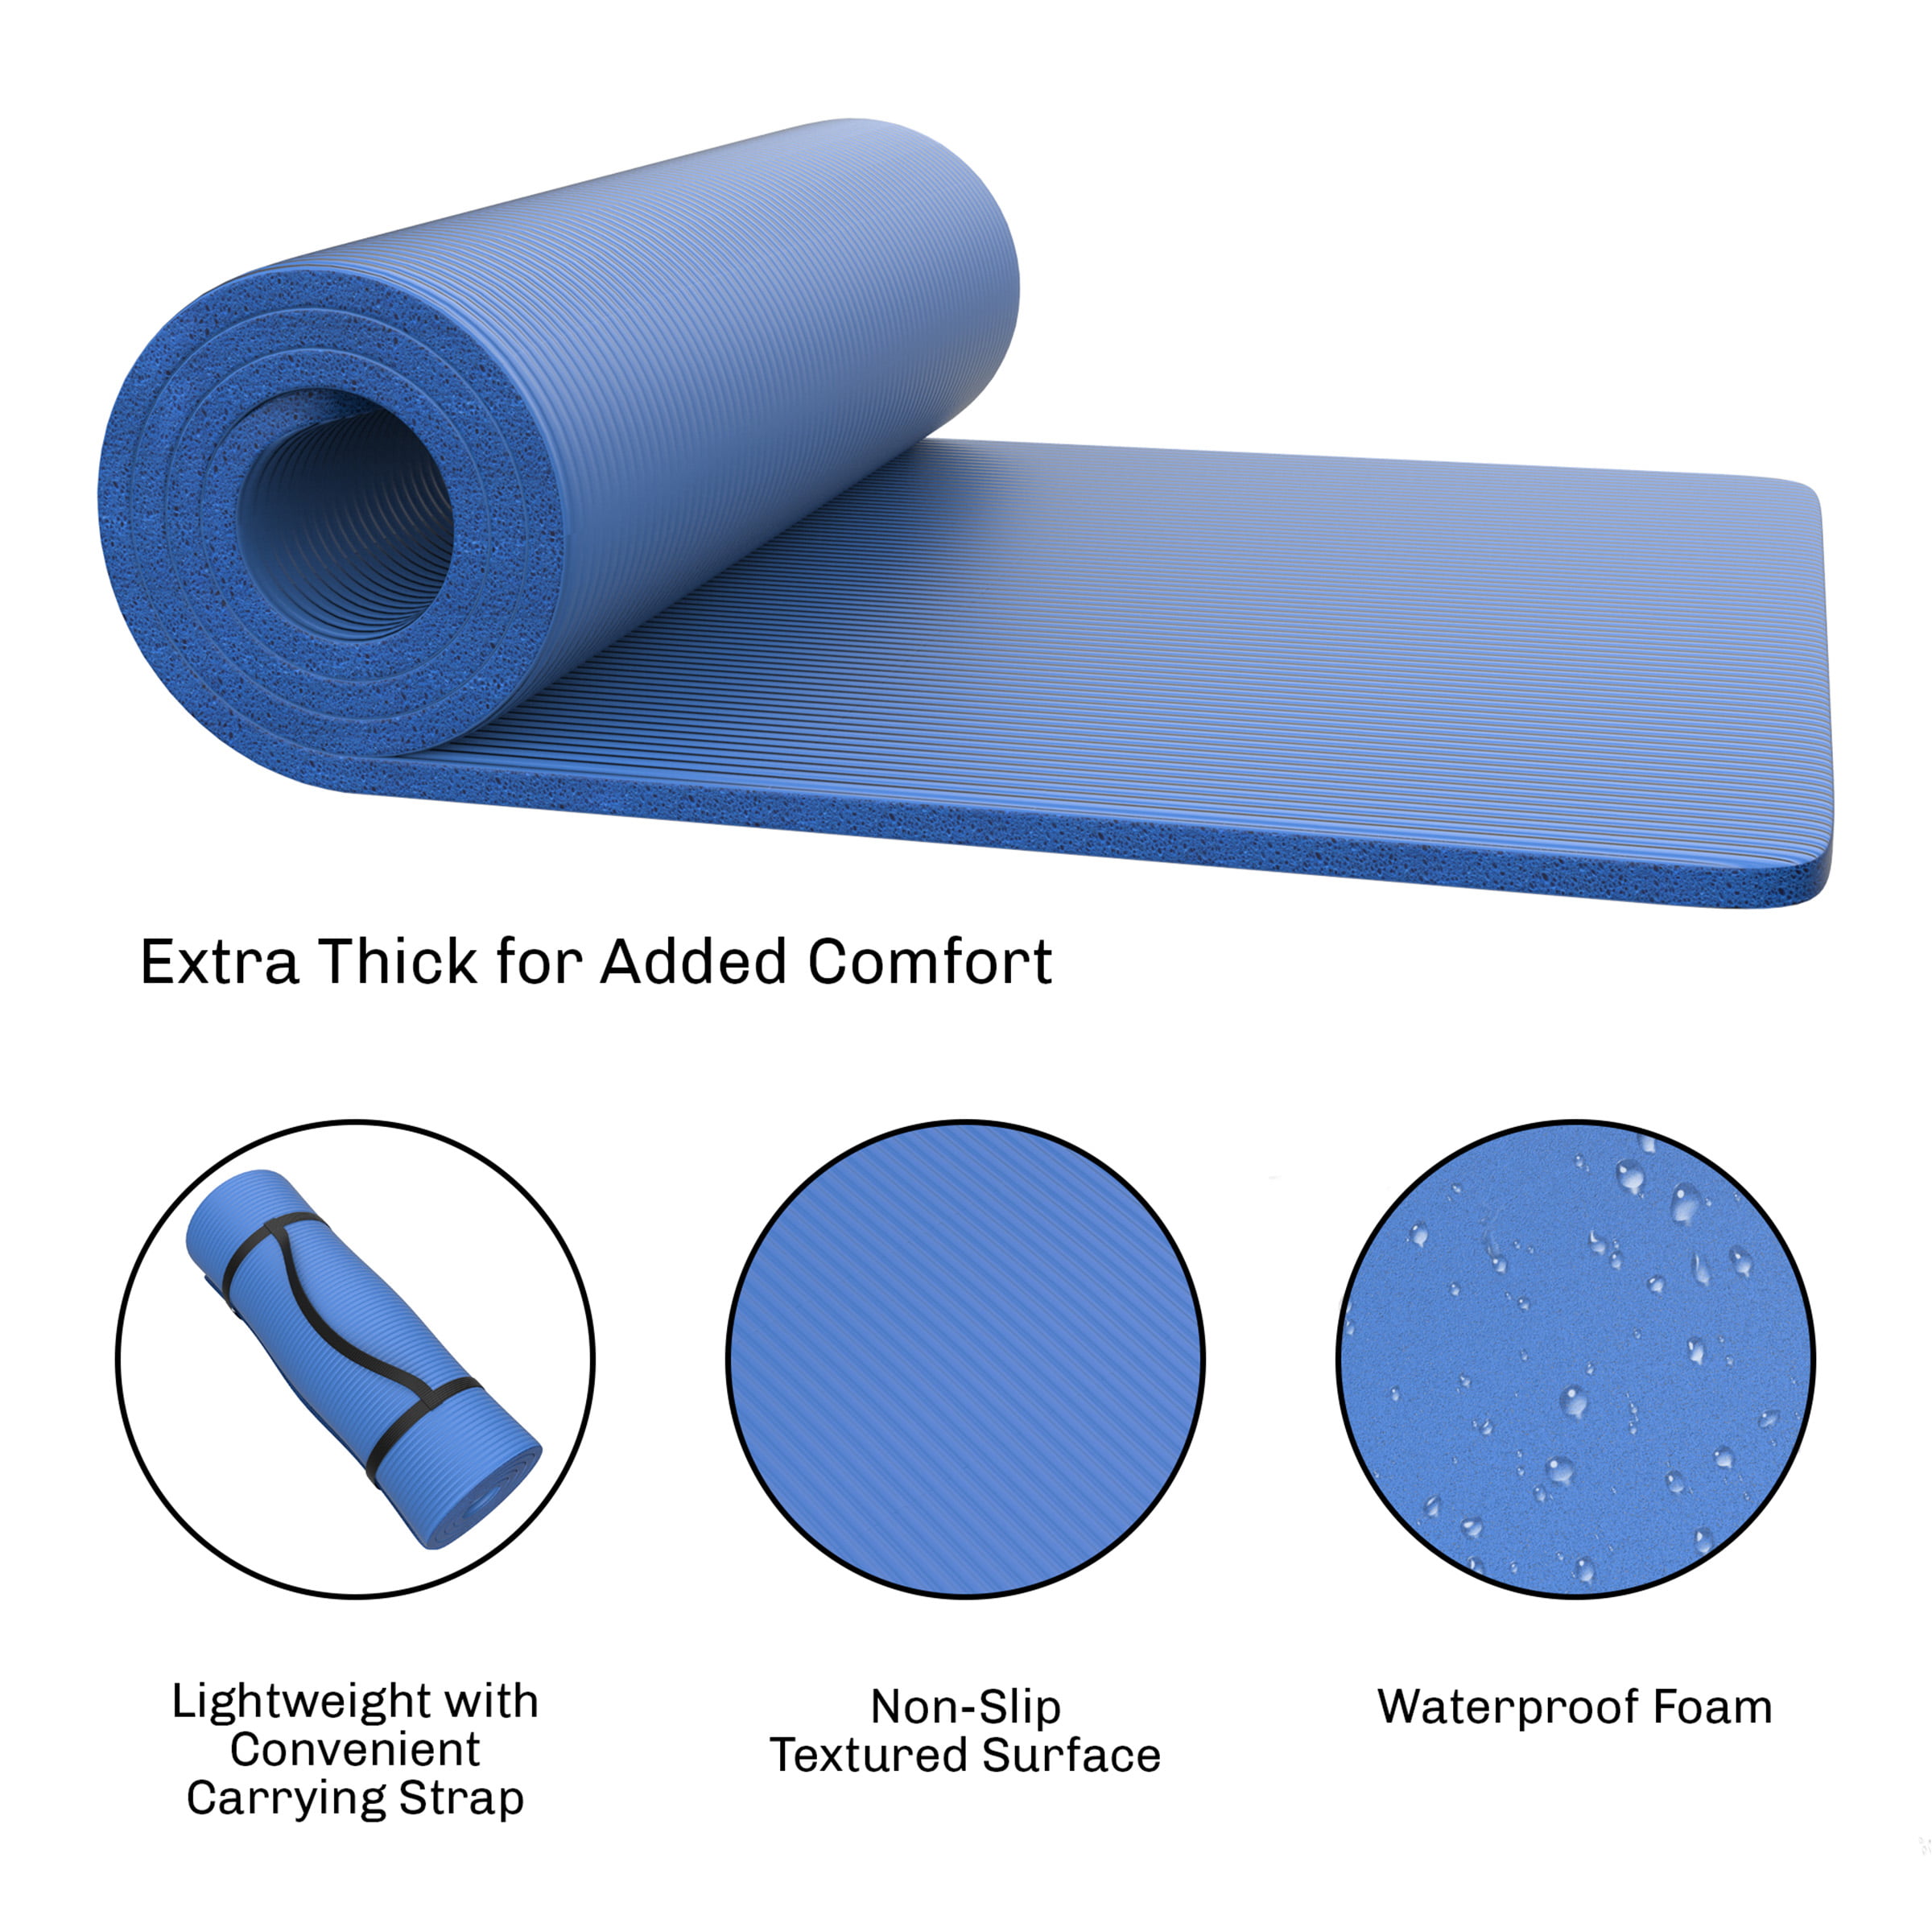 Foam Sleep Pad- 0.75” Thick Camping Mat for Cots, Tents, Sleeping Bags -  Non-Slip, Lightweight, Waterproof & Carry Handle by Wakeman Outdoors (Blue)